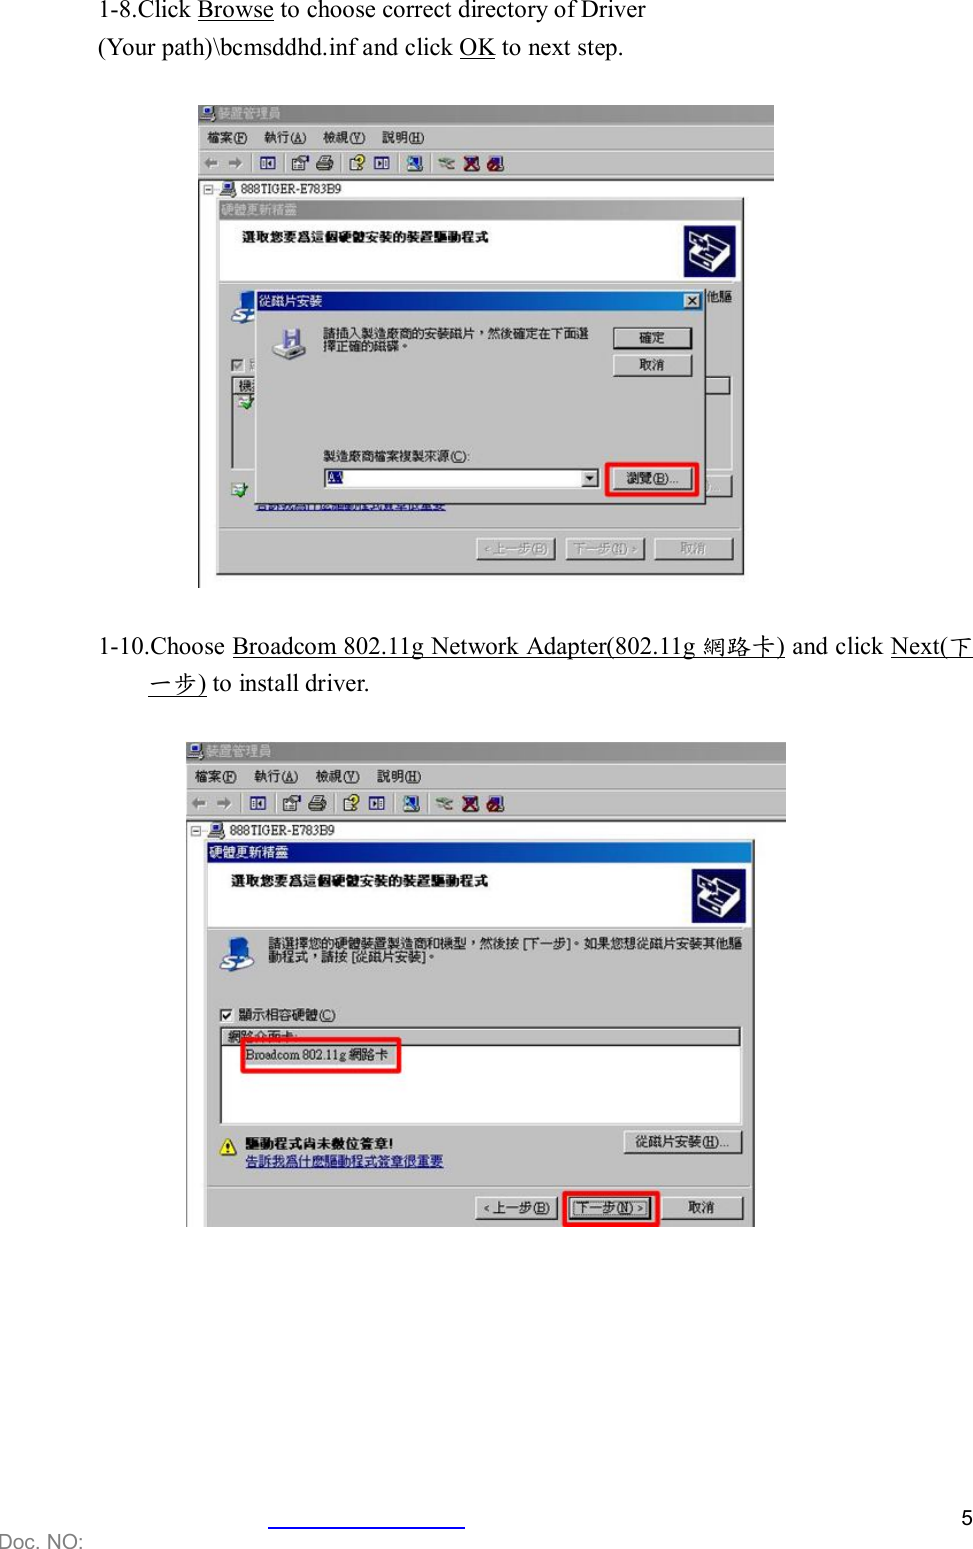    Doc. NO:   5 1-8.Click Browse to choose correct directory of Driver   (Your path)\bcmsddhd.inf and click OK  to next step.     1-10.Choose Broadcom 802.11g Network Adapter(802.11g 網路卡) and click Next(下一步)  to install driver.          